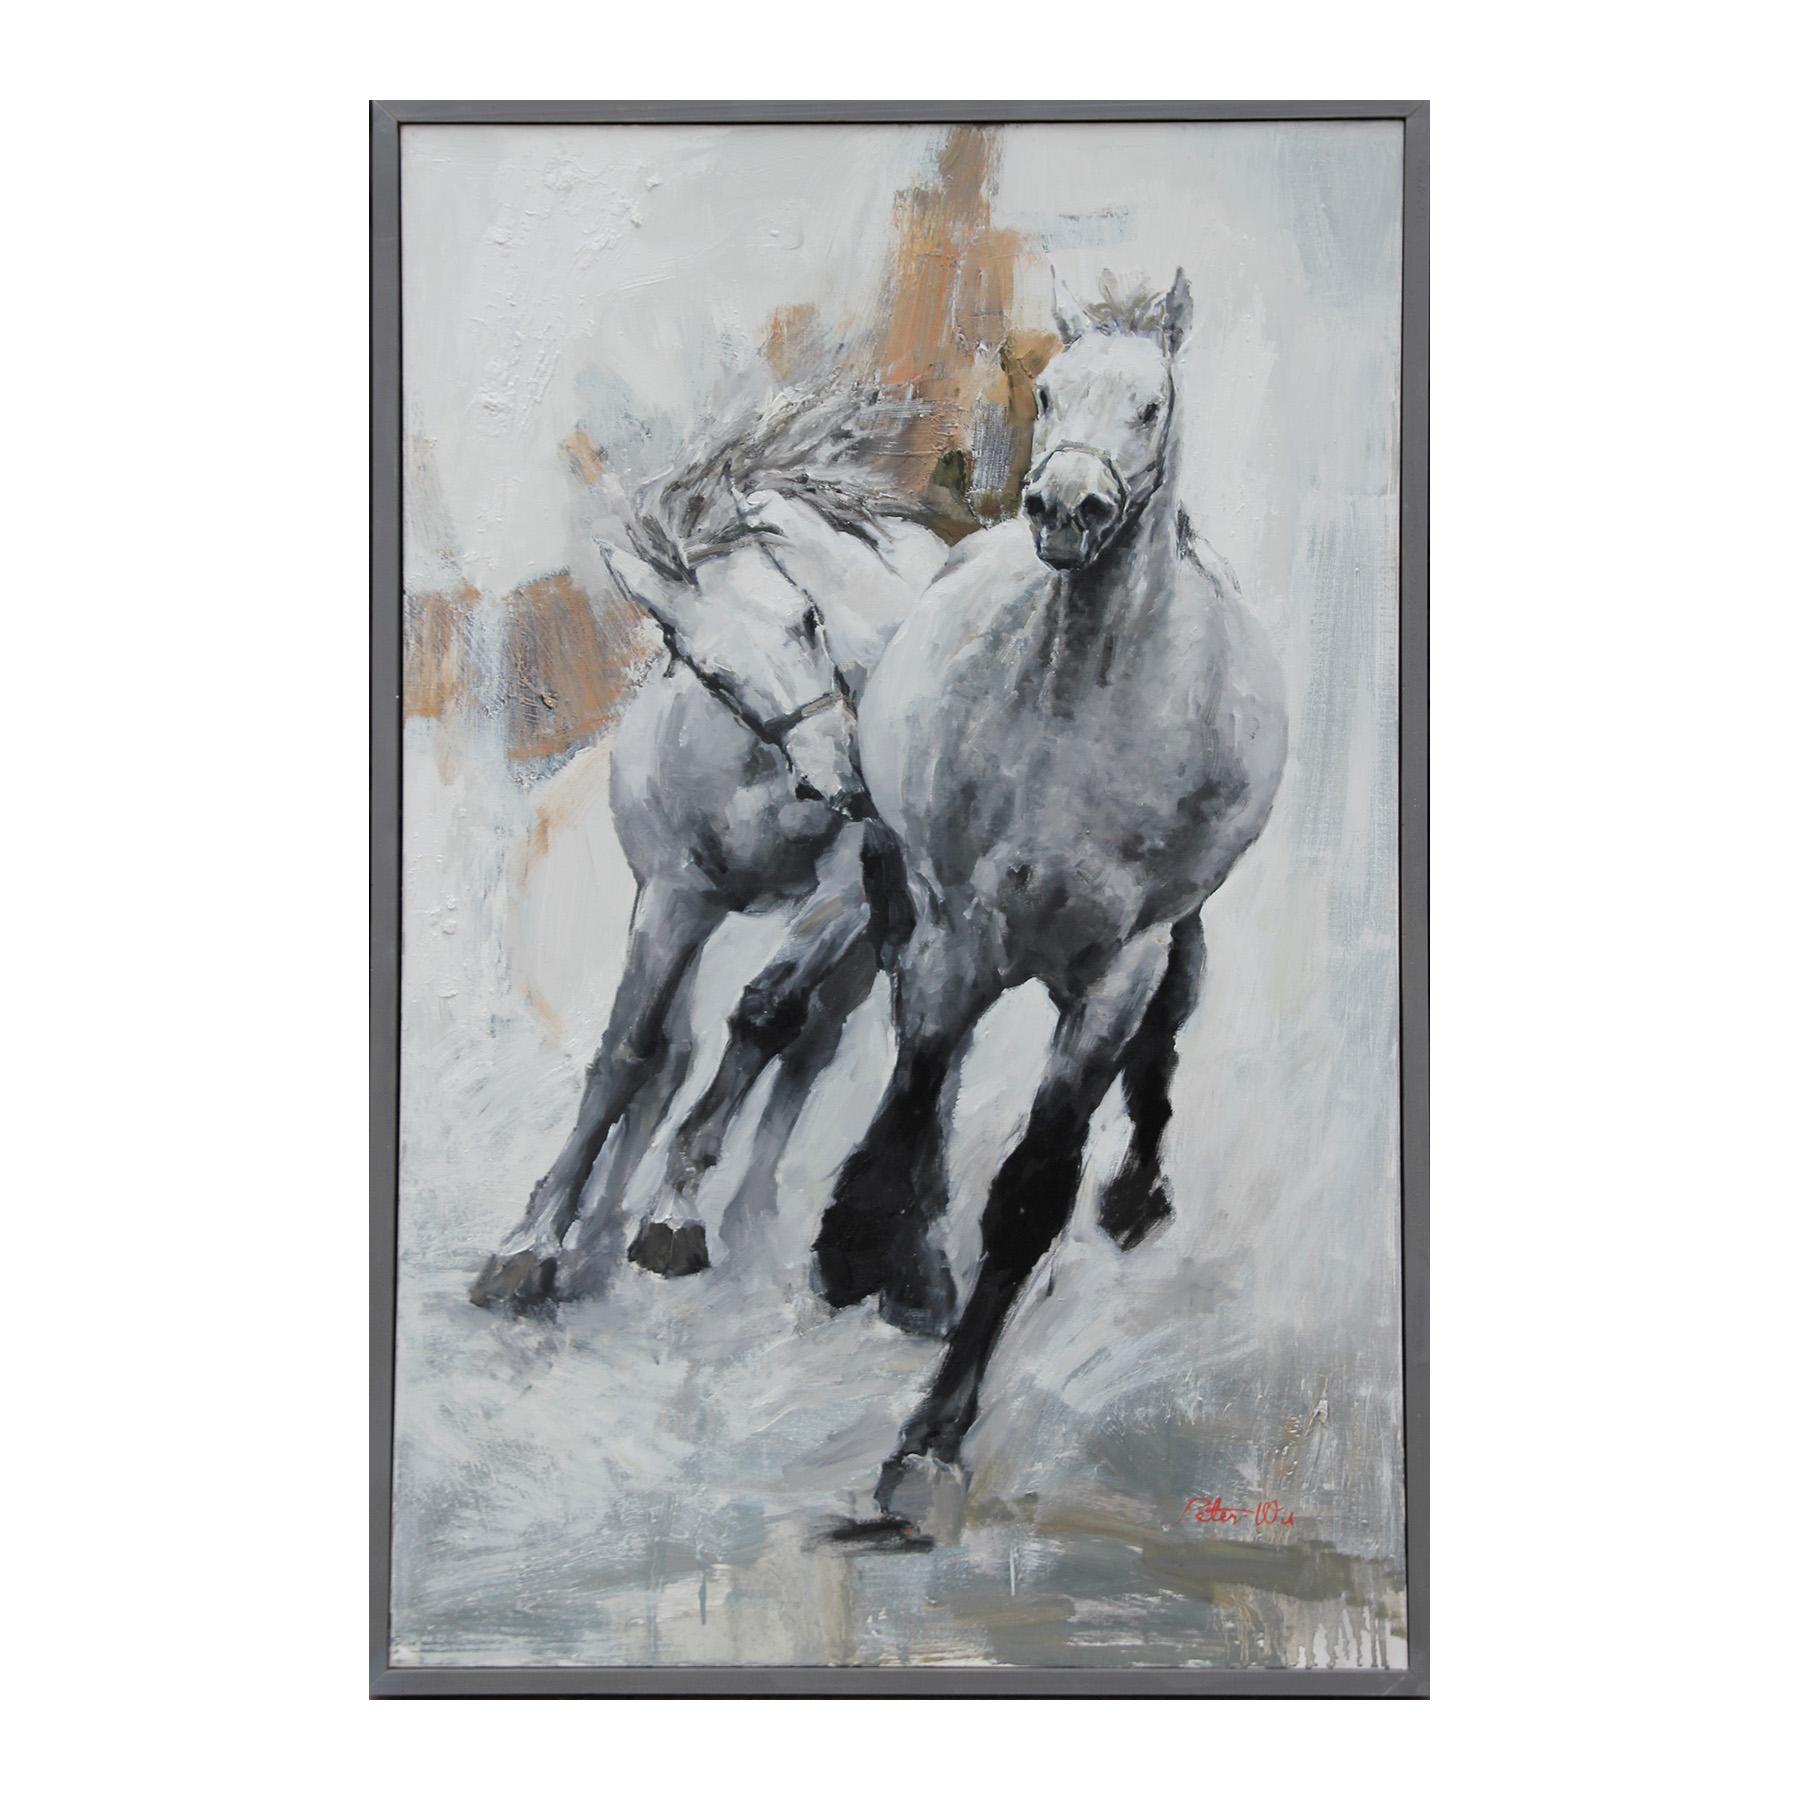 Peter Wu Animal Painting - "Go straight to the benchmark" Abstract Modern Equestrian Horse Racing Painting